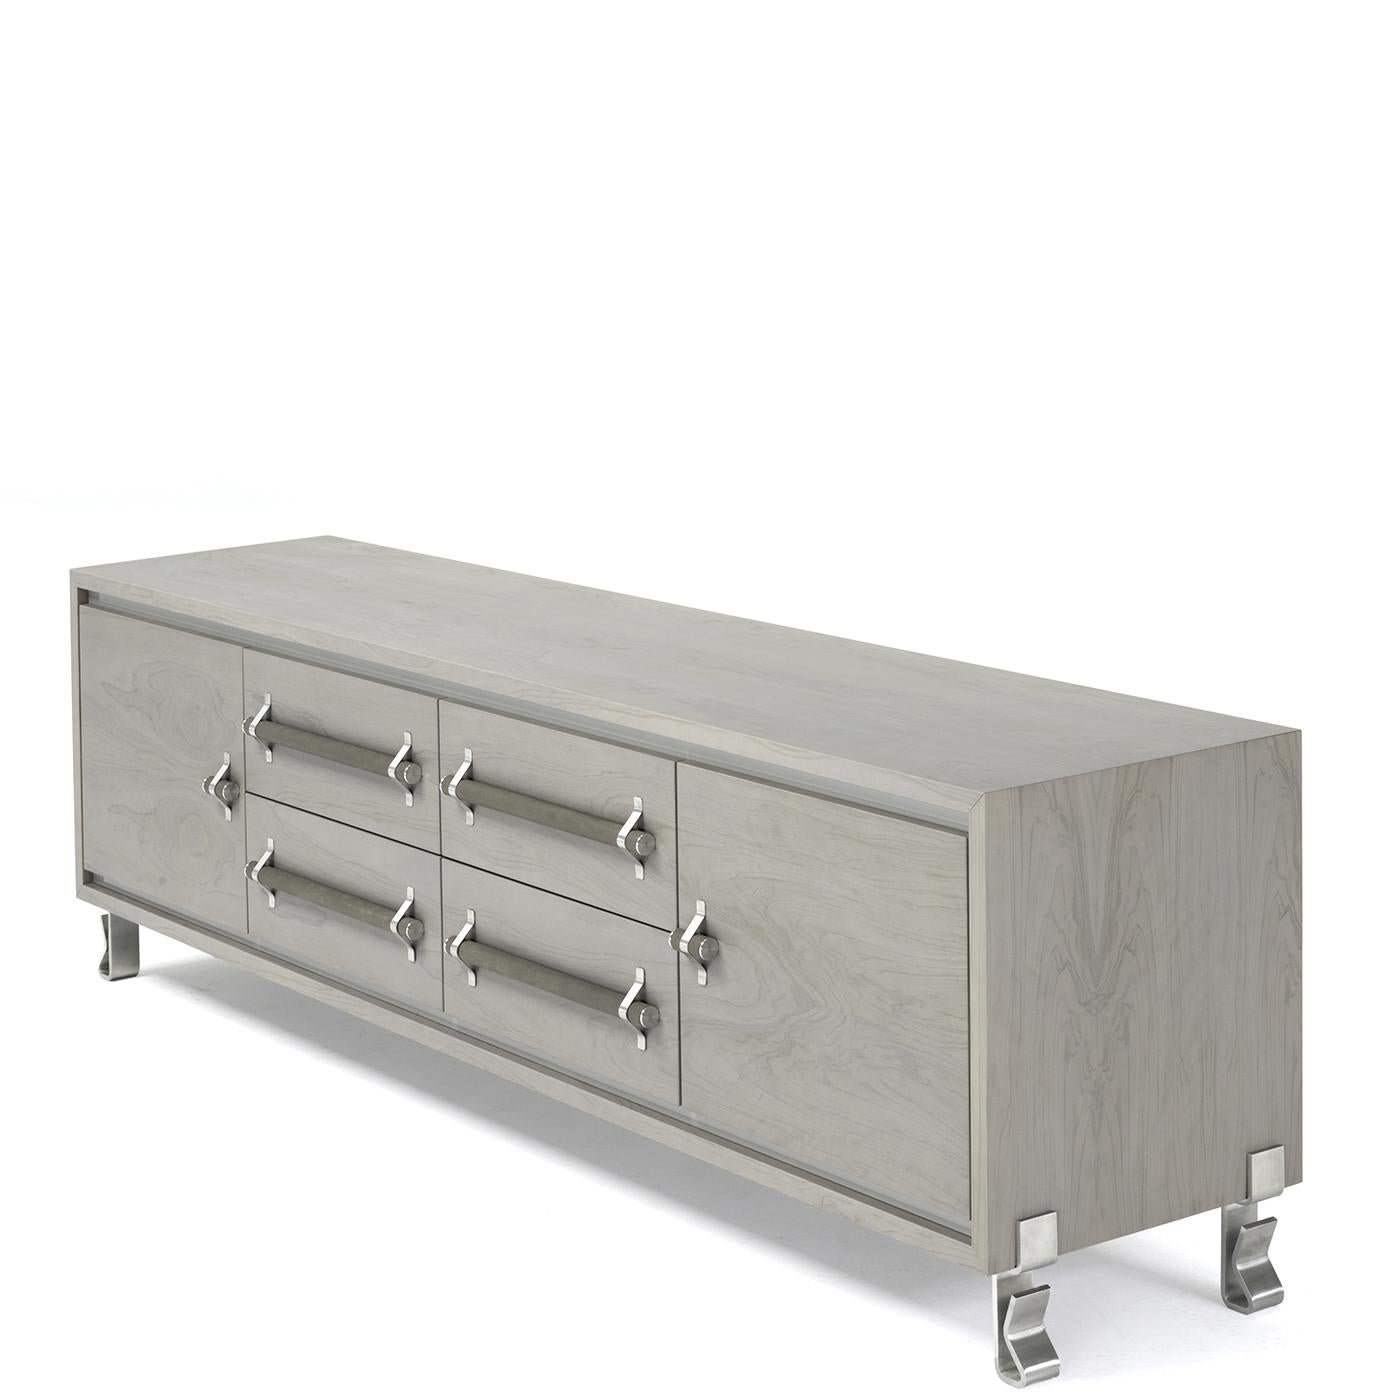 This turtle gray, olive wood media cabinet features gray parapan inserts, two doors, satin stainless steel feet and four drawers covered in genuine leather and equipped with stainless steel handles. This item has a utilitarian industrial look that